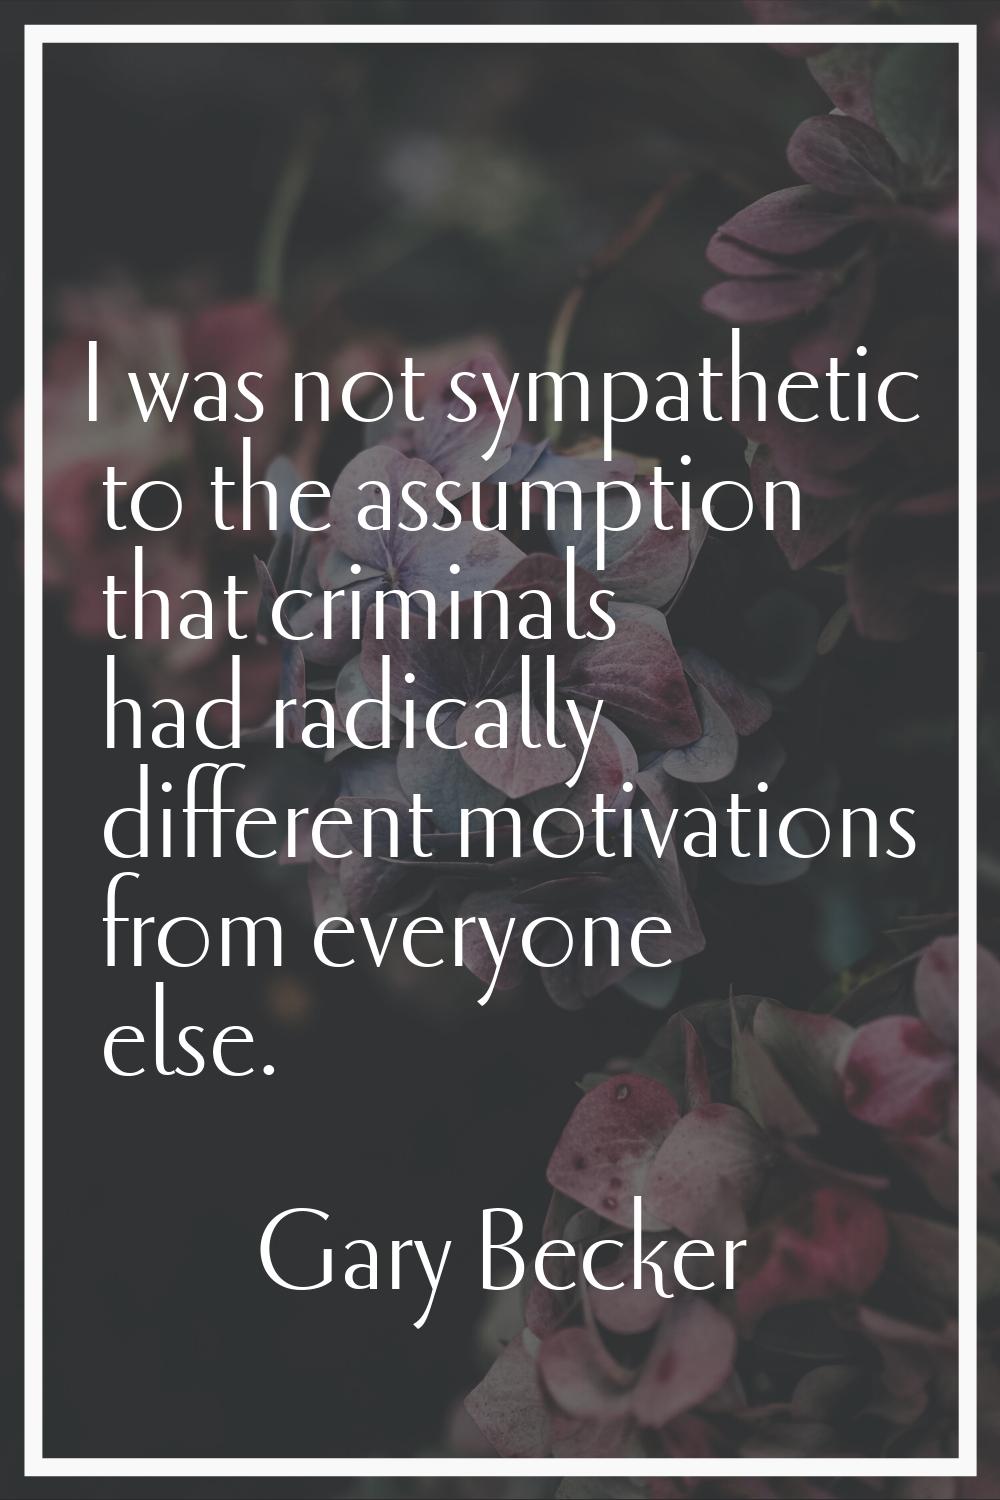 I was not sympathetic to the assumption that criminals had radically different motivations from eve